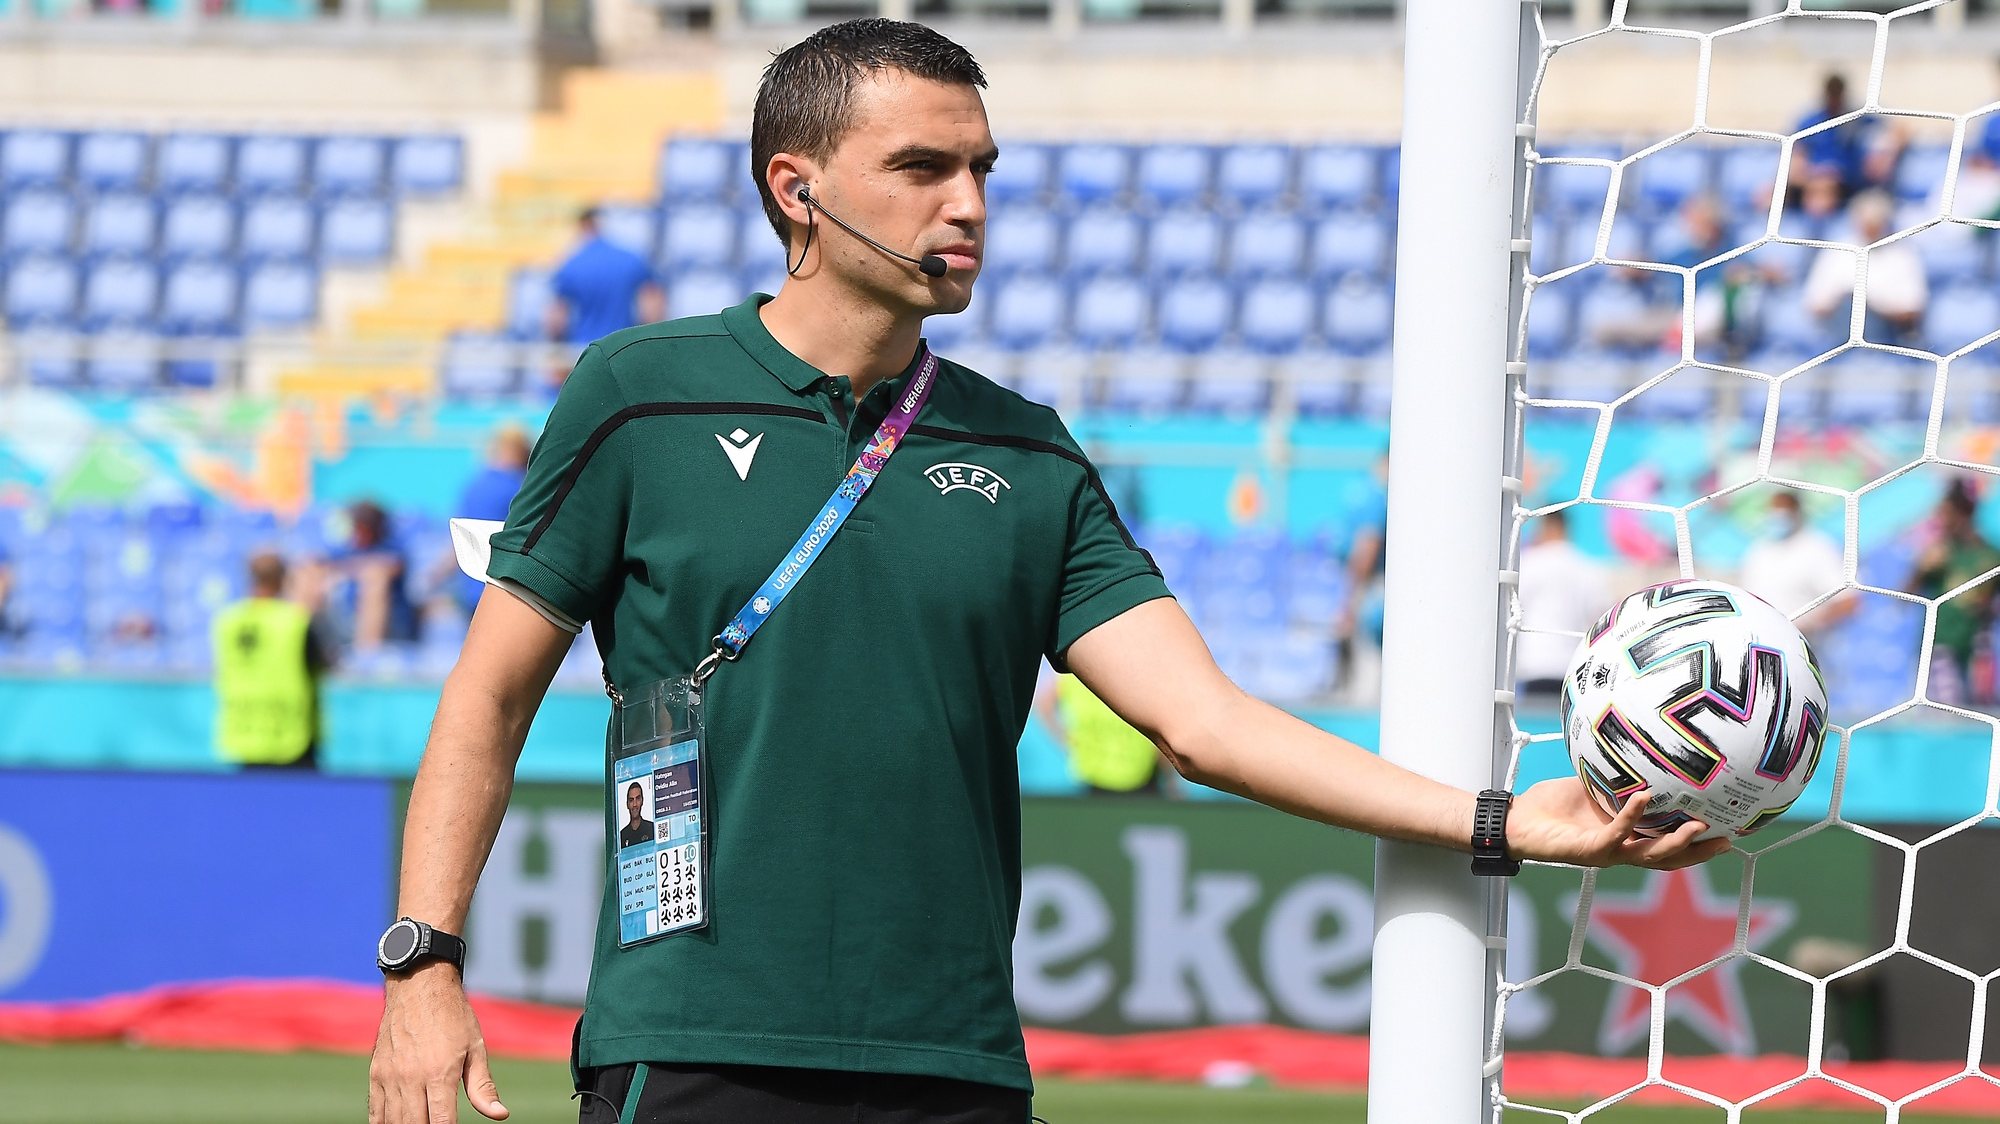 epa09288336 Romanian referee Ovidiu Hategan checks the goal line technology prior to the UEFA EURO 2020 group A preliminary round soccer match between Italy and Wales in Rome, Italy, 20 June 2021.  EPA/Alberto Lingria / POOL (RESTRICTIONS: For editorial news reporting purposes only. Images must appear as still images and must not emulate match action video footage. Photographs published in online publications shall have an interval of at least 20 seconds between the posting.)